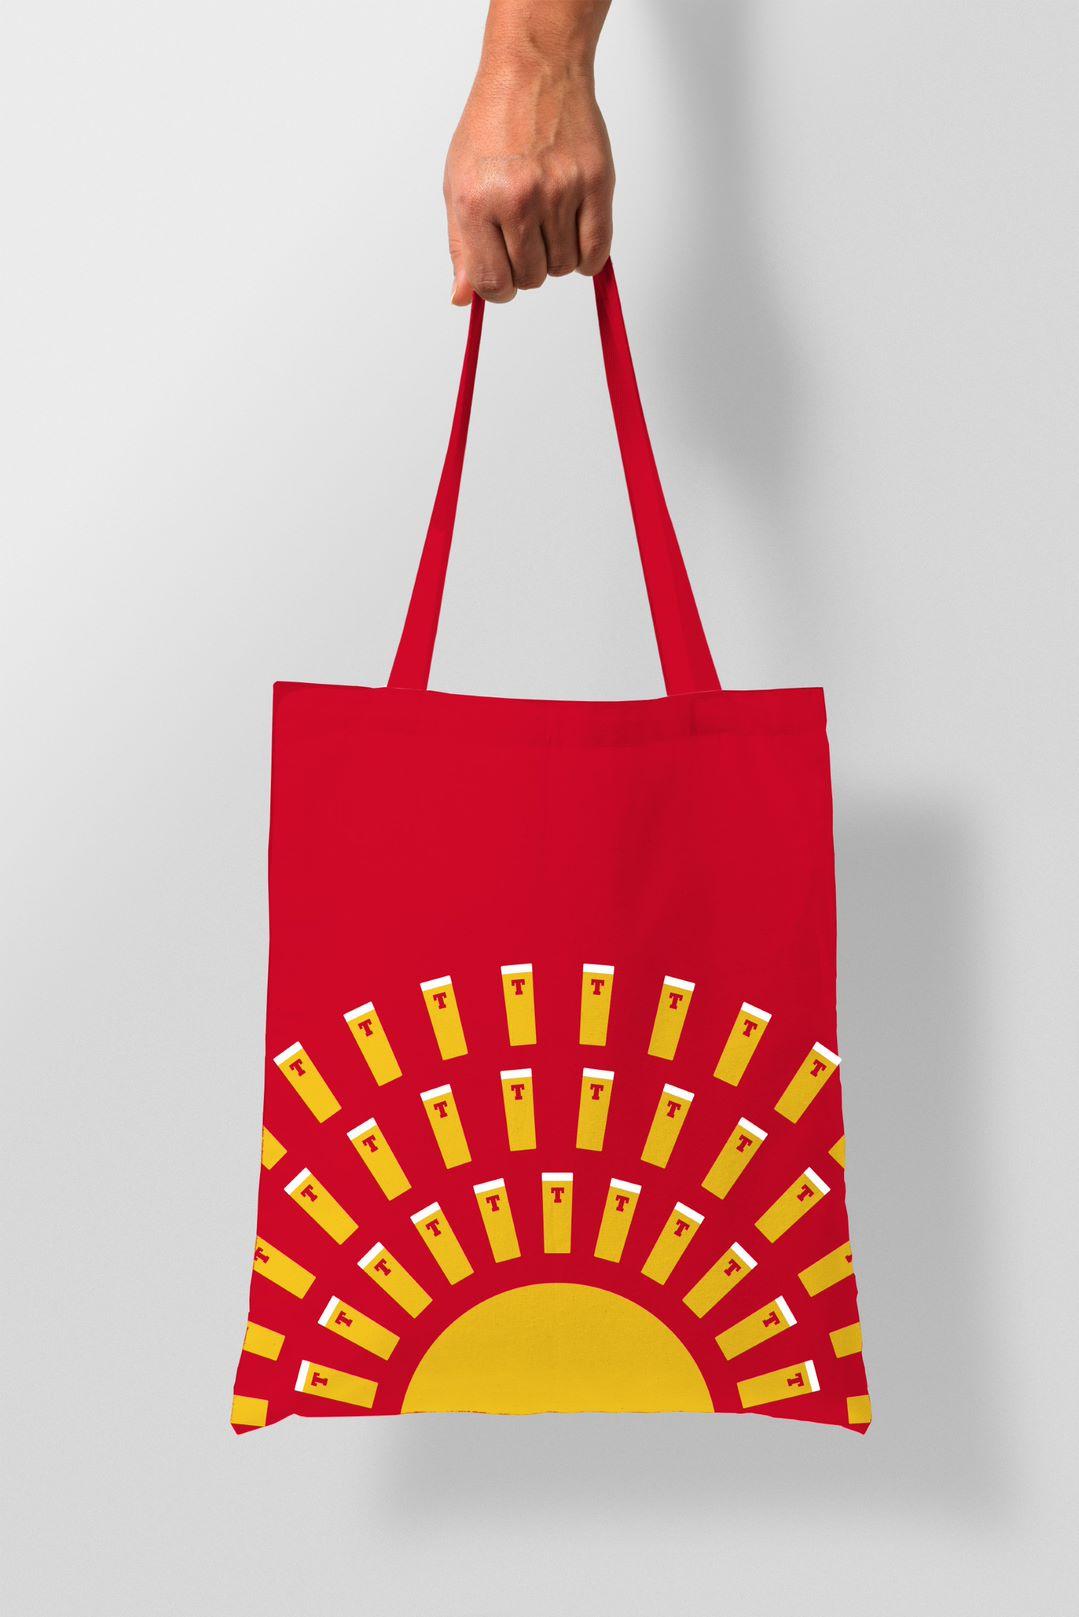 tennent's tote bag